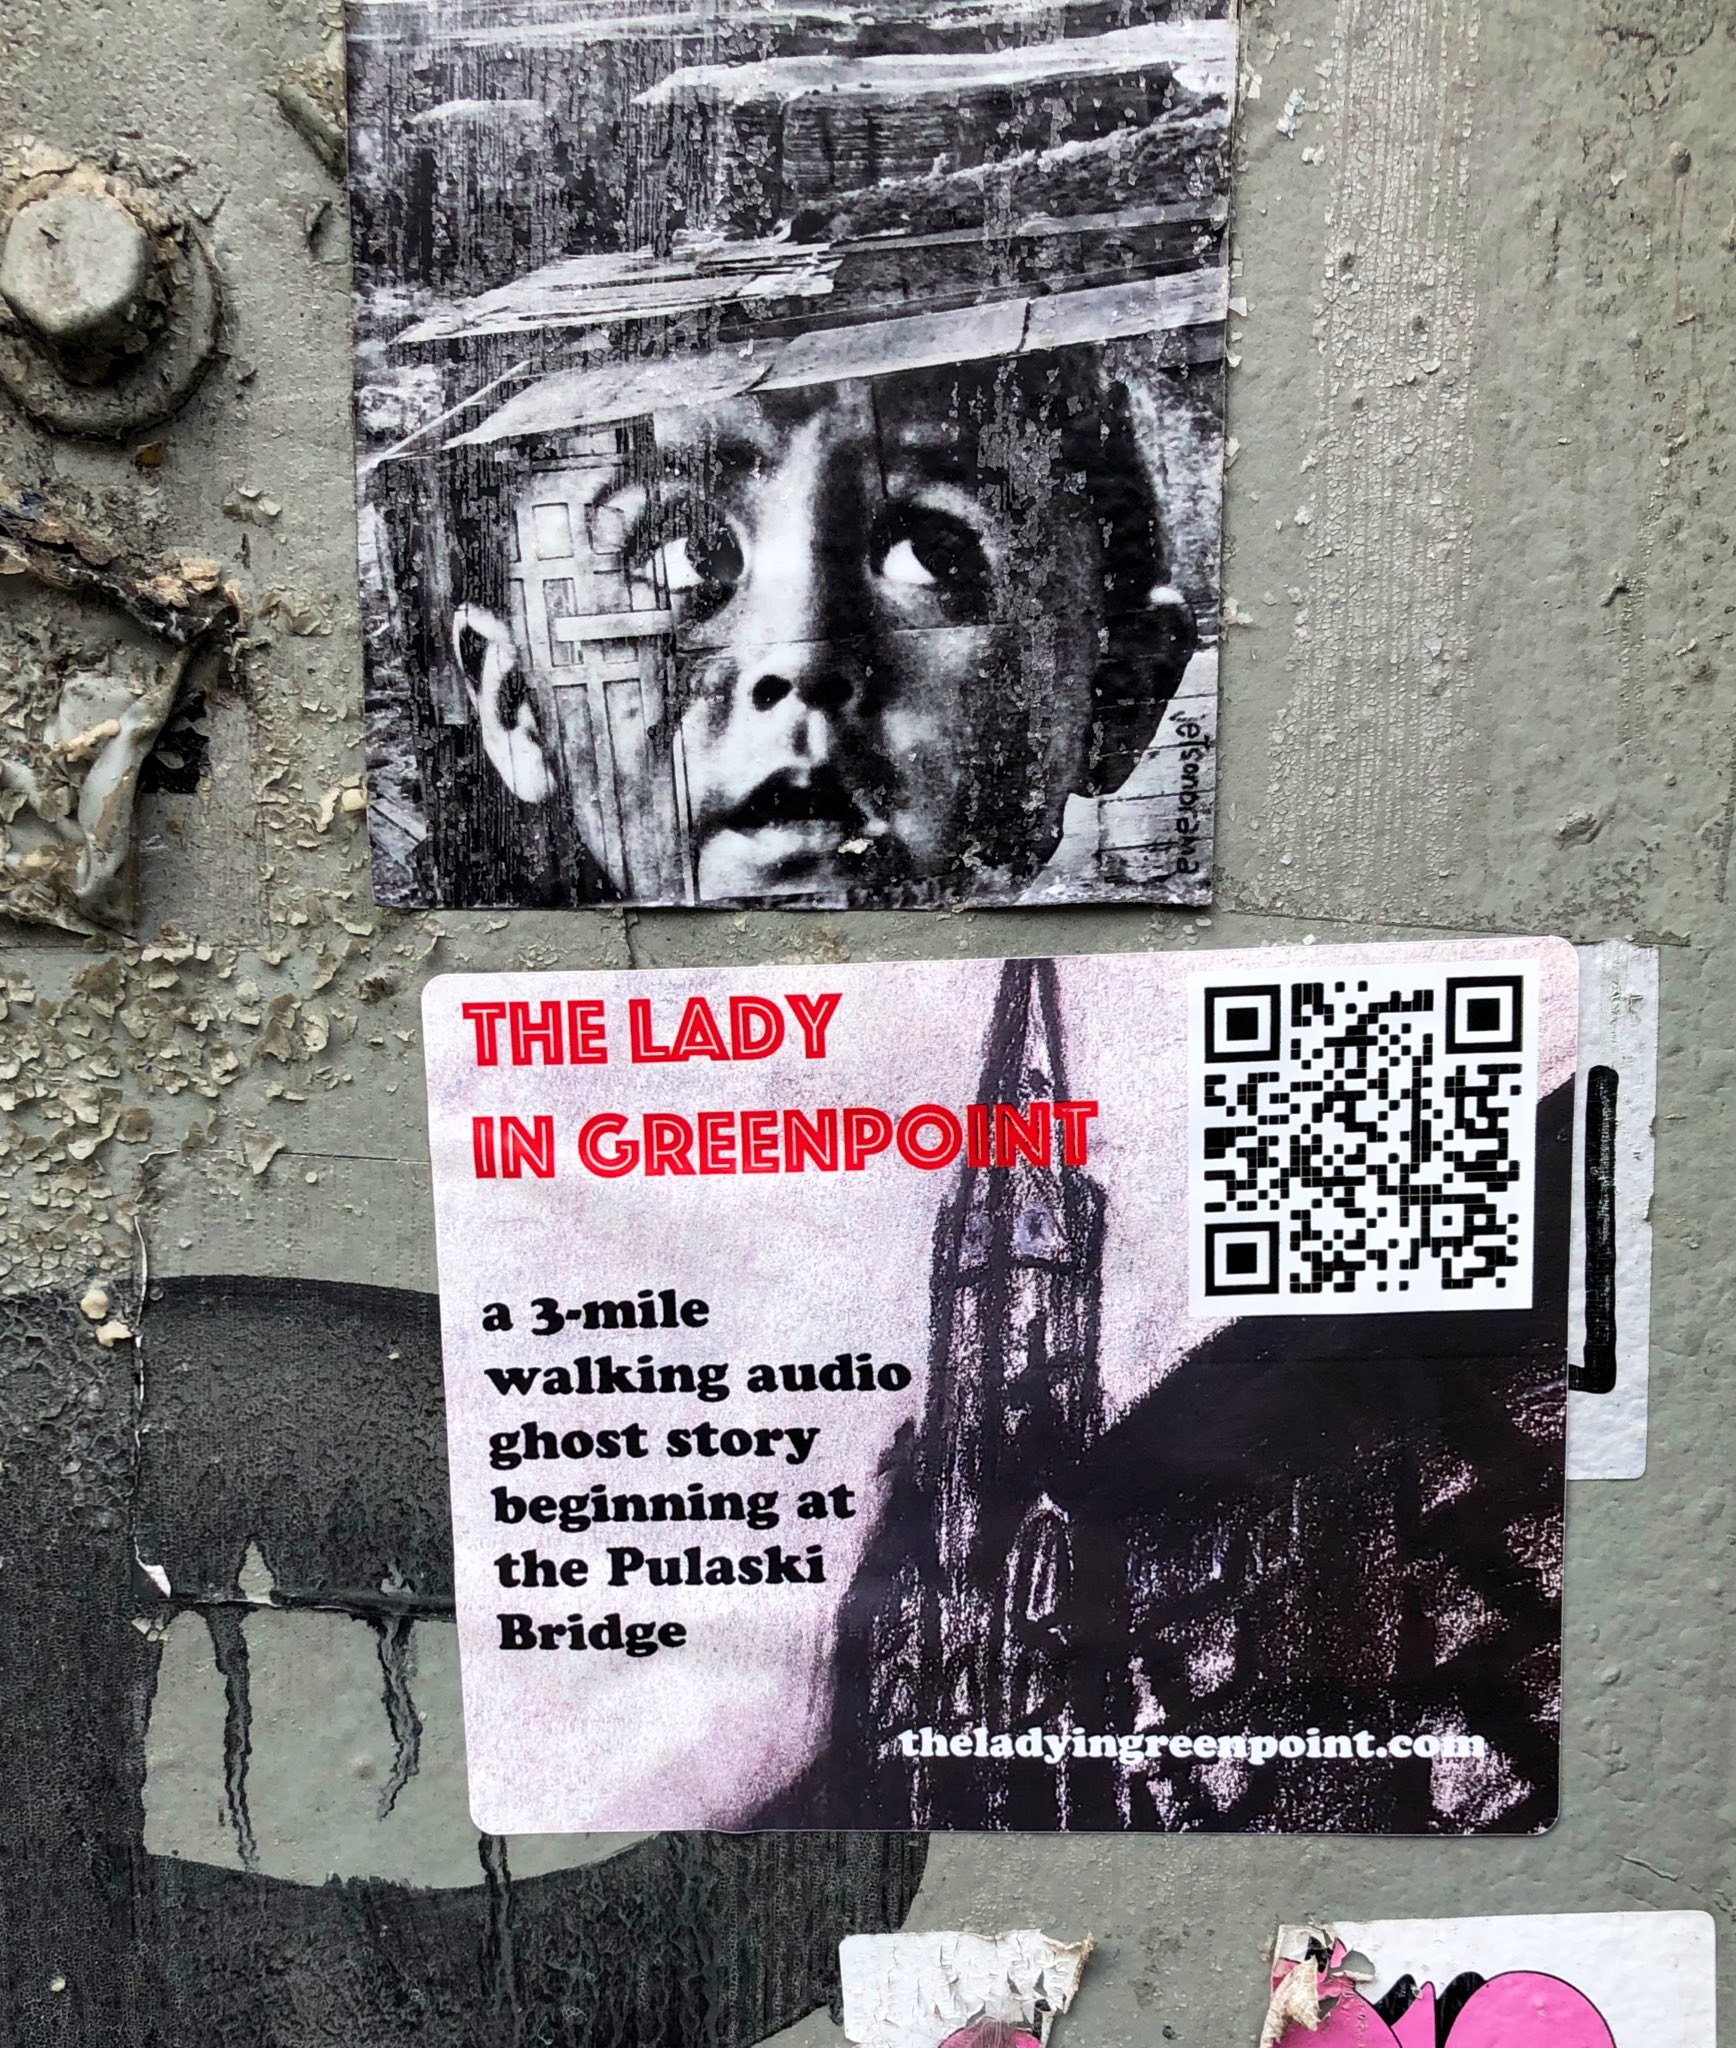 Plastered around Greenpoint and its surrounding neighborhoods, homemade stickers advertised the spookiest story set in Brooklyn. 